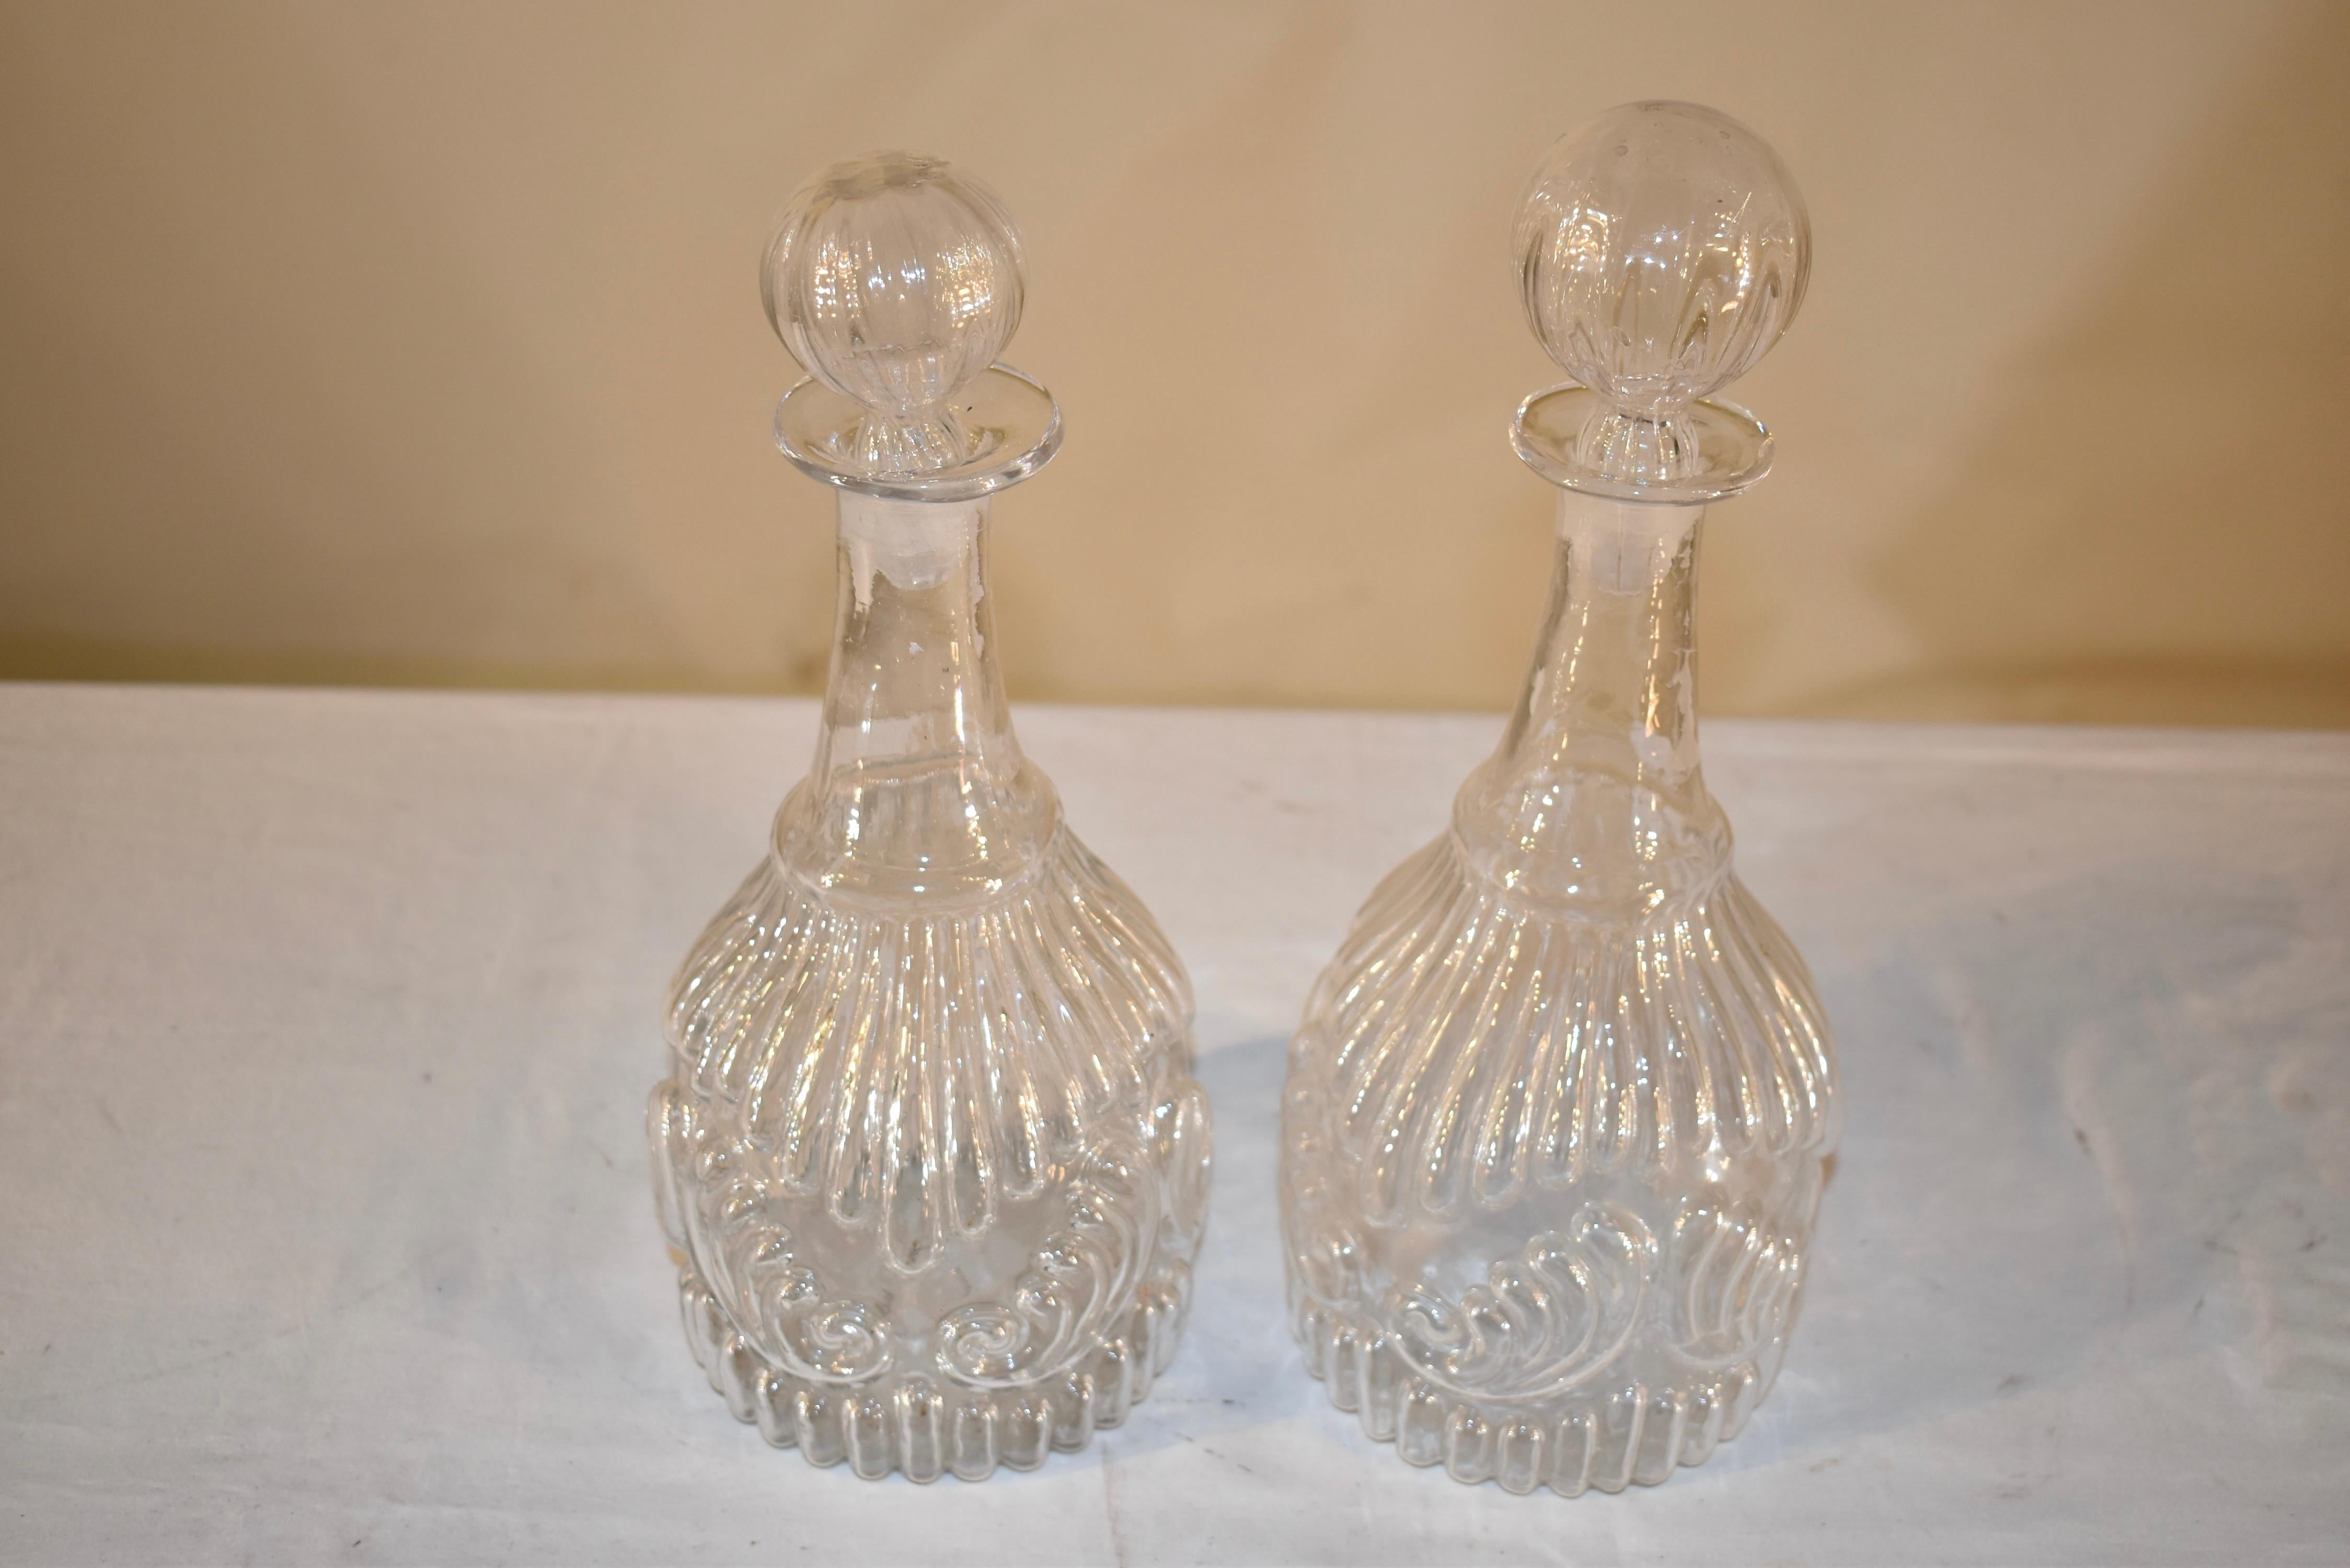 Pair of Early 19th Century American Mold Blown Decanters In Good Condition For Sale In High Point, NC